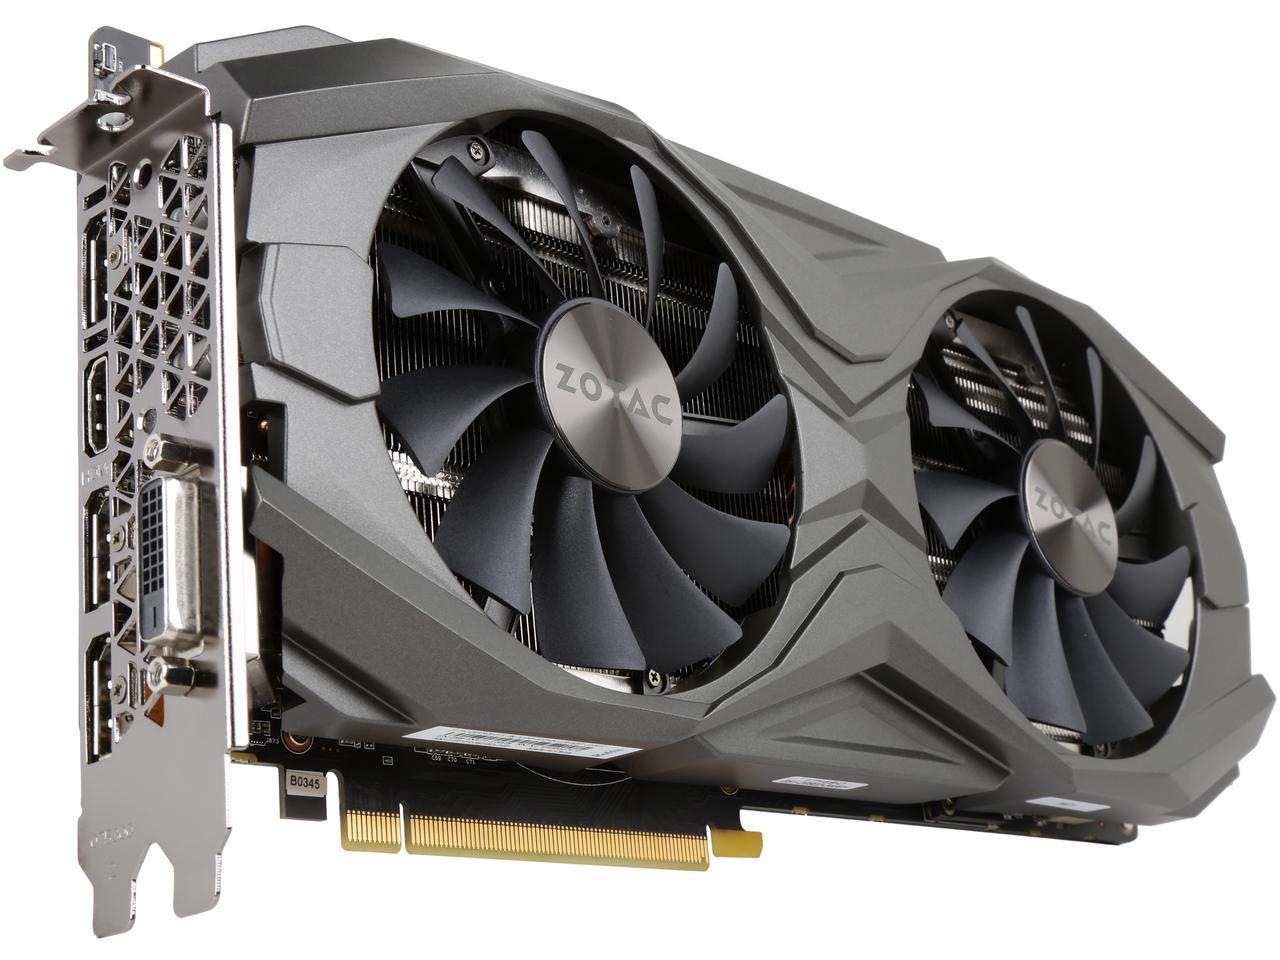 ZOTAC GeForce GTX 1080 Ti AMP Edition 11GB GDDR5X 352-bit Gaming Graphics Card Ready 16+2 Power Phase Freeze Fan Stop IceStorm Cooling Spectra Lighting ZT-P10810D-10P GPUs / Video Graphics Cards